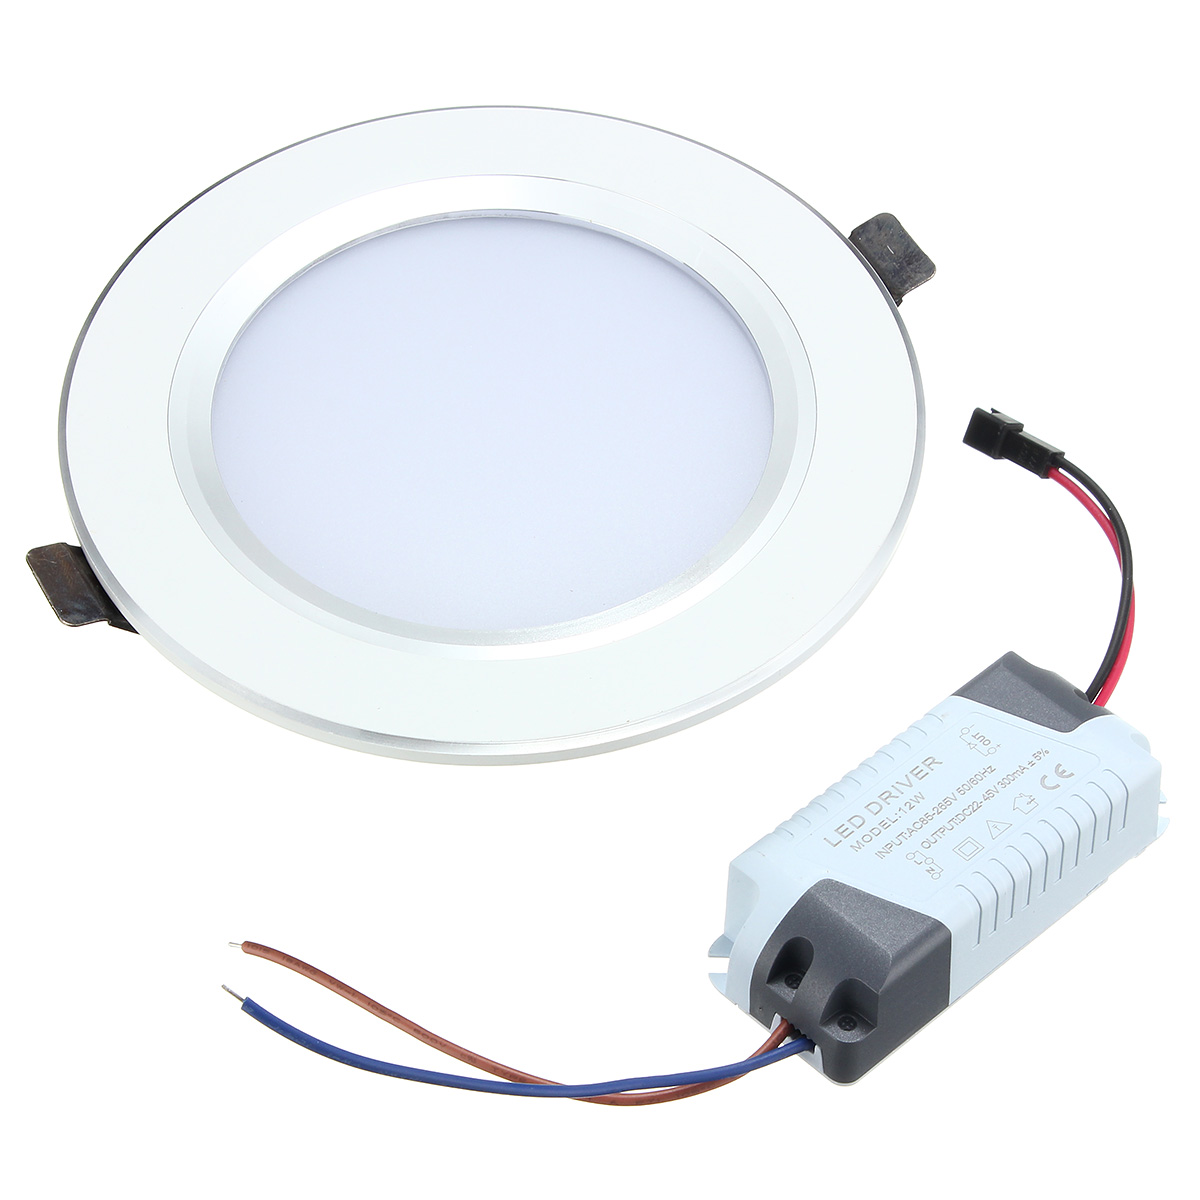 Find 85 265V 12W 5730 24SMD Low Power Ceiling Lamp Warm White/White Light for Bedroom Dining Room Kitchen for Sale on Gipsybee.com with cryptocurrencies